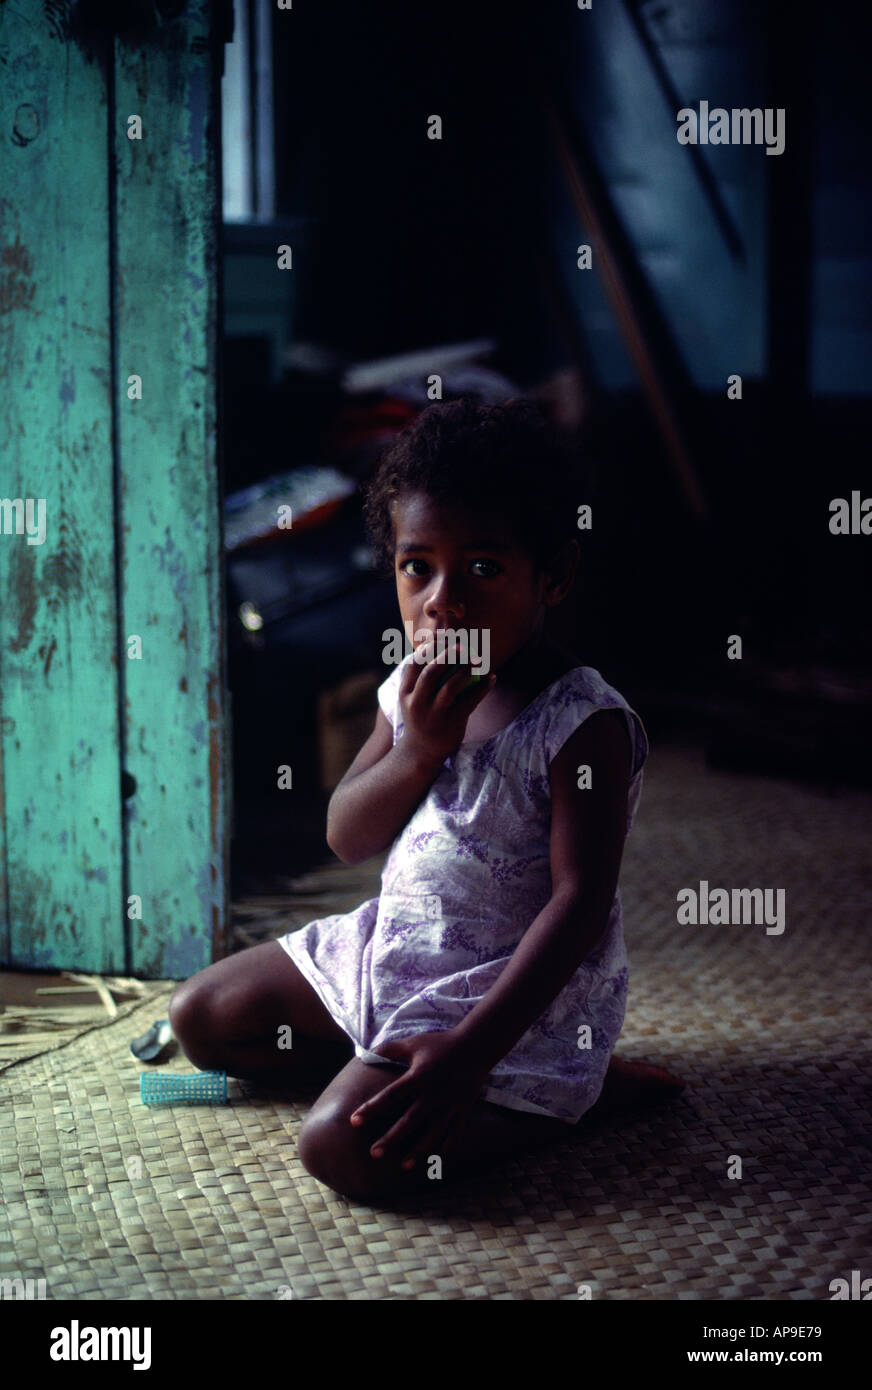 A small girl on Yanuya Island Fiji is studying a foreign visitor Stock Photo